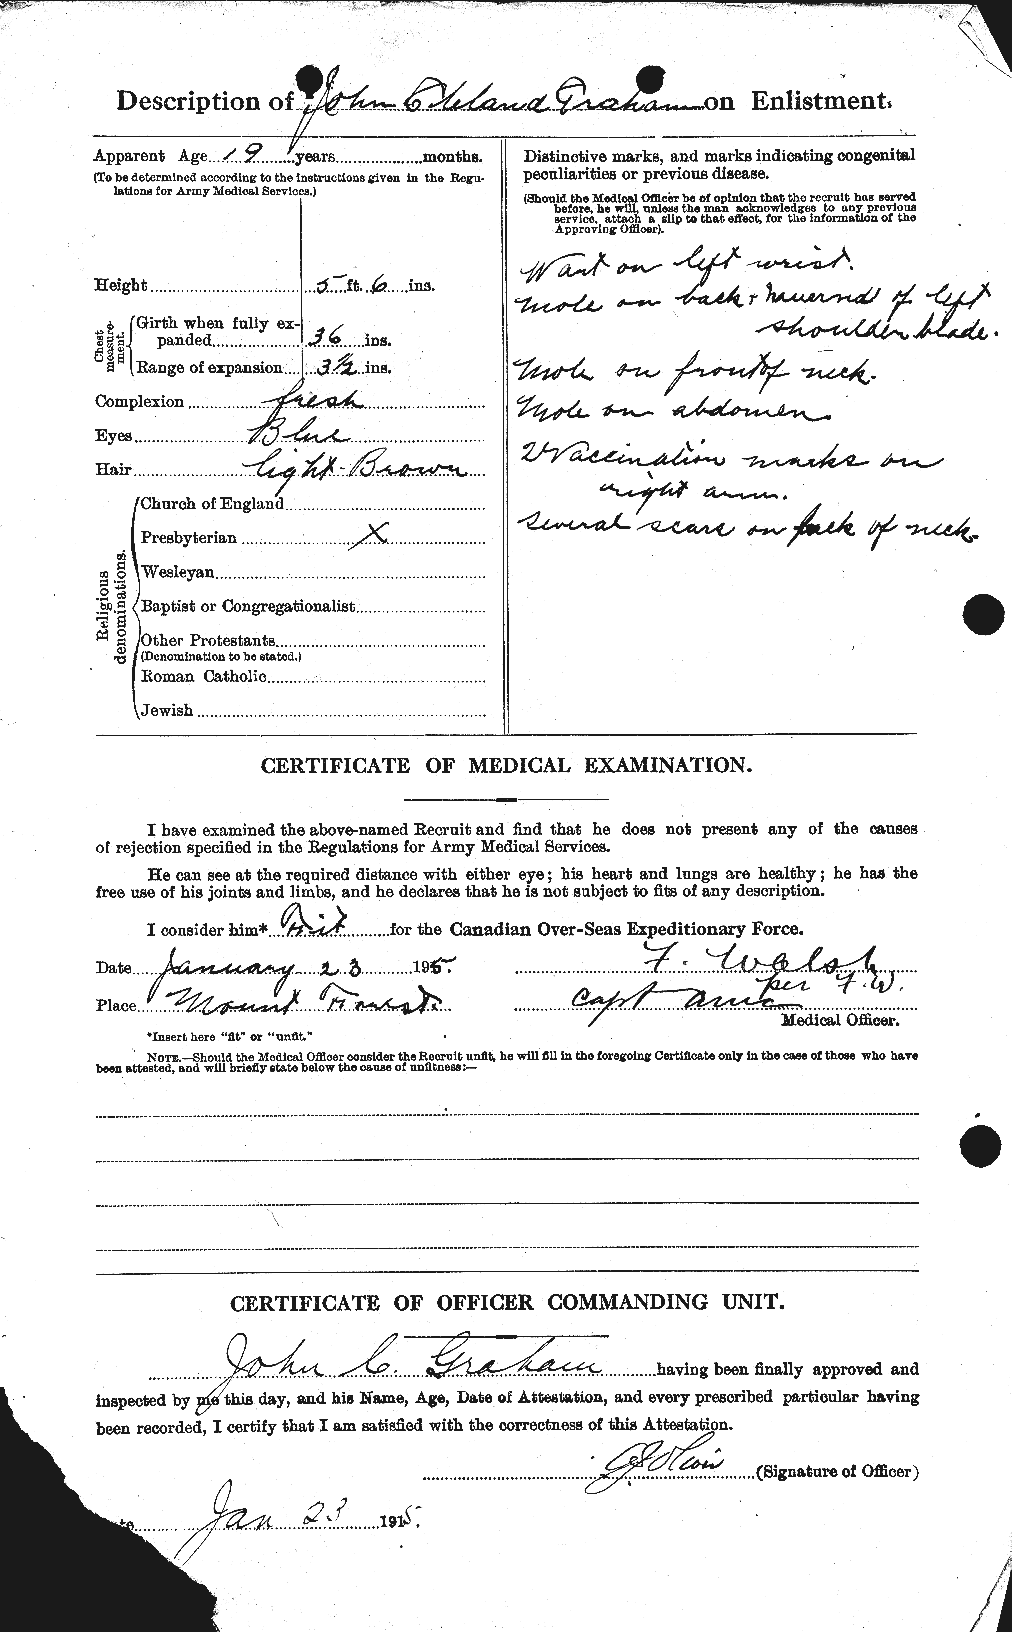 Personnel Records of the First World War - CEF 359162b